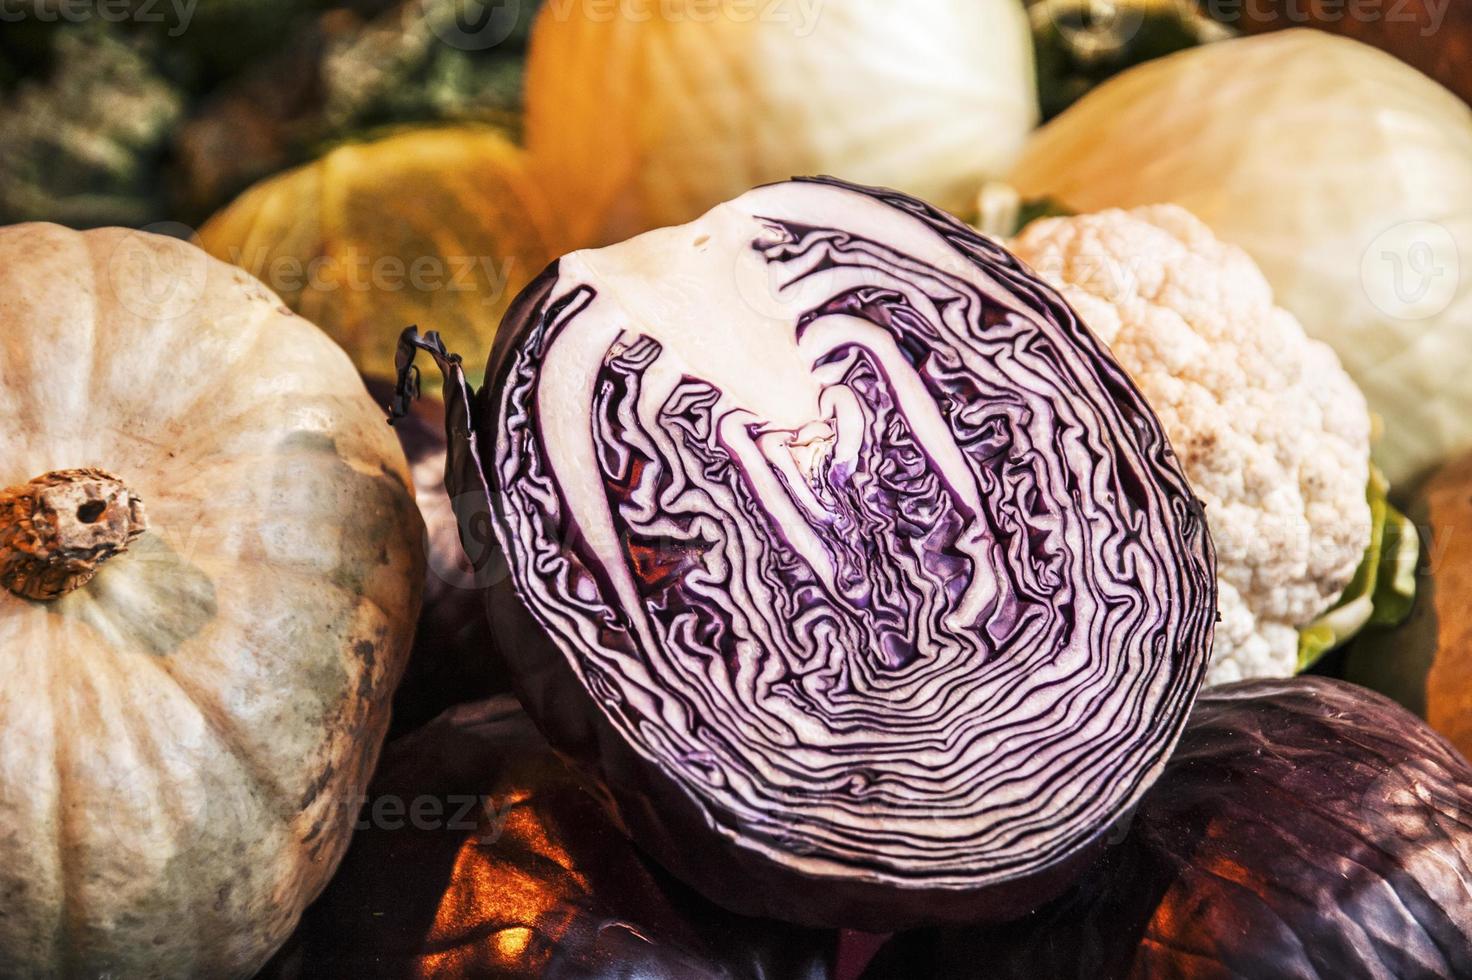 Red Cabbage and Vegetables photo